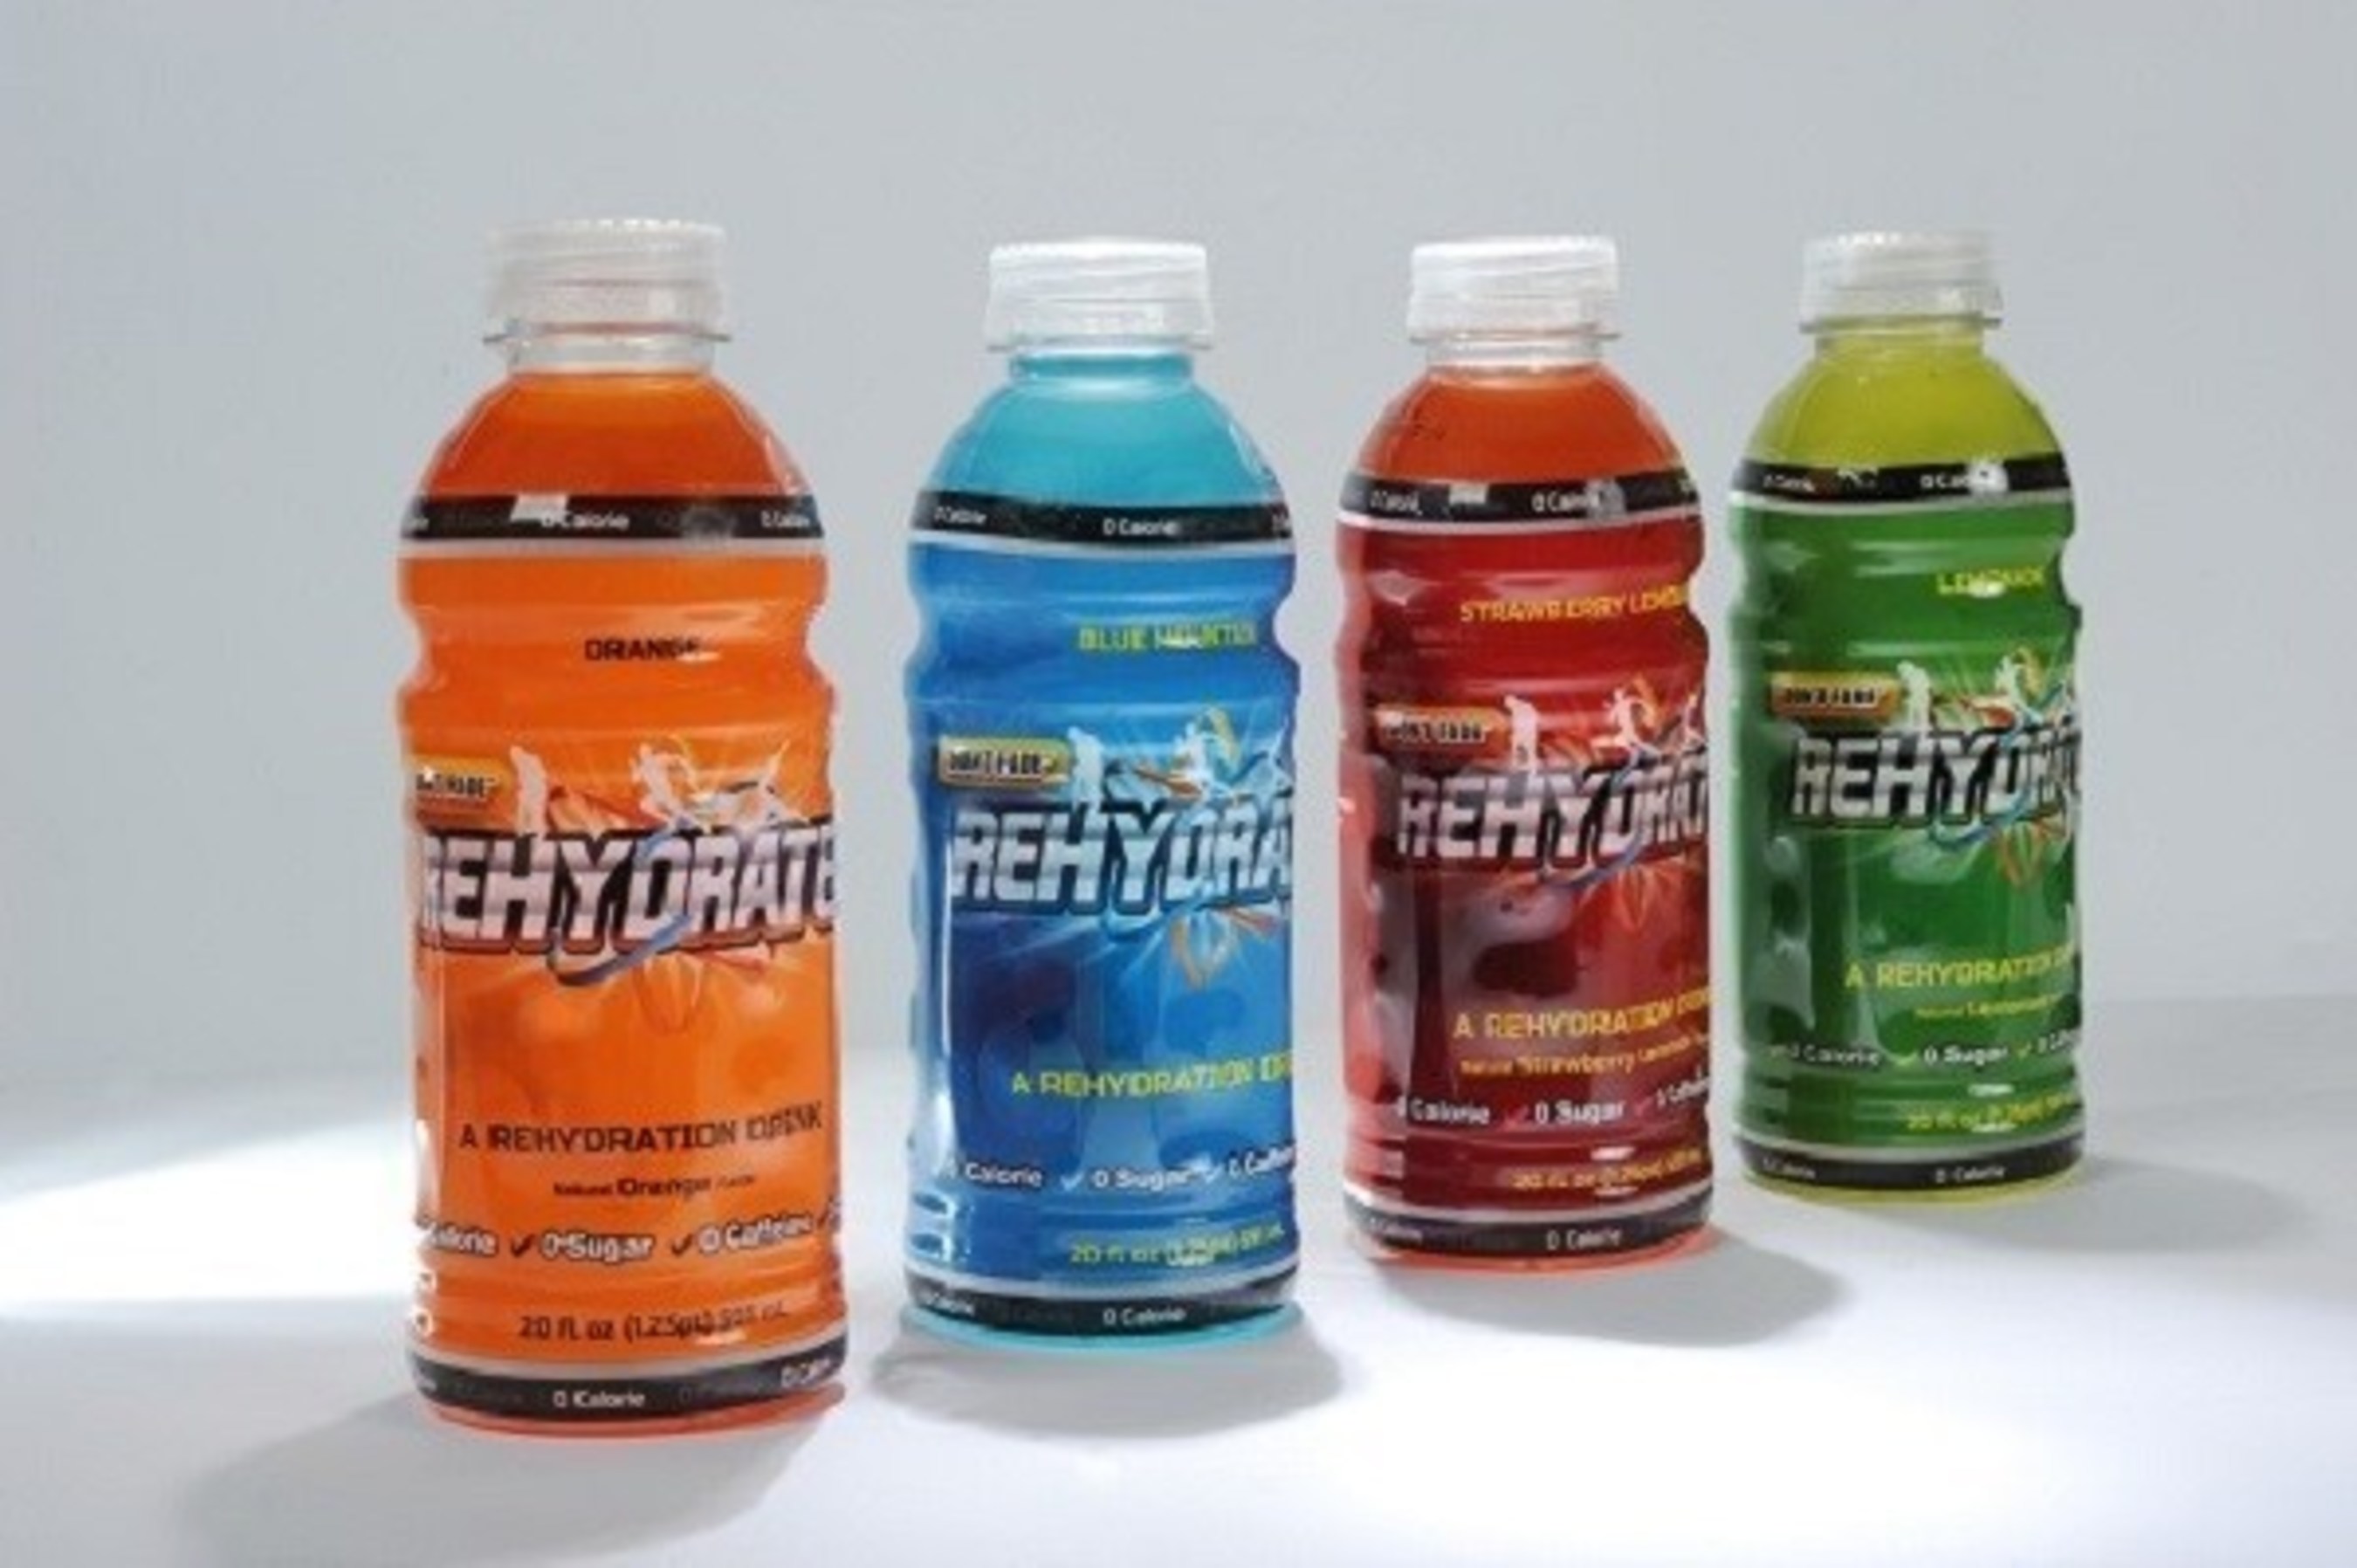 Rehydrate contains no calories, no sugar, no fat, no caffeine and 1 carb with 3 times more electrolytes and 2 times more vitamins than the competitions.